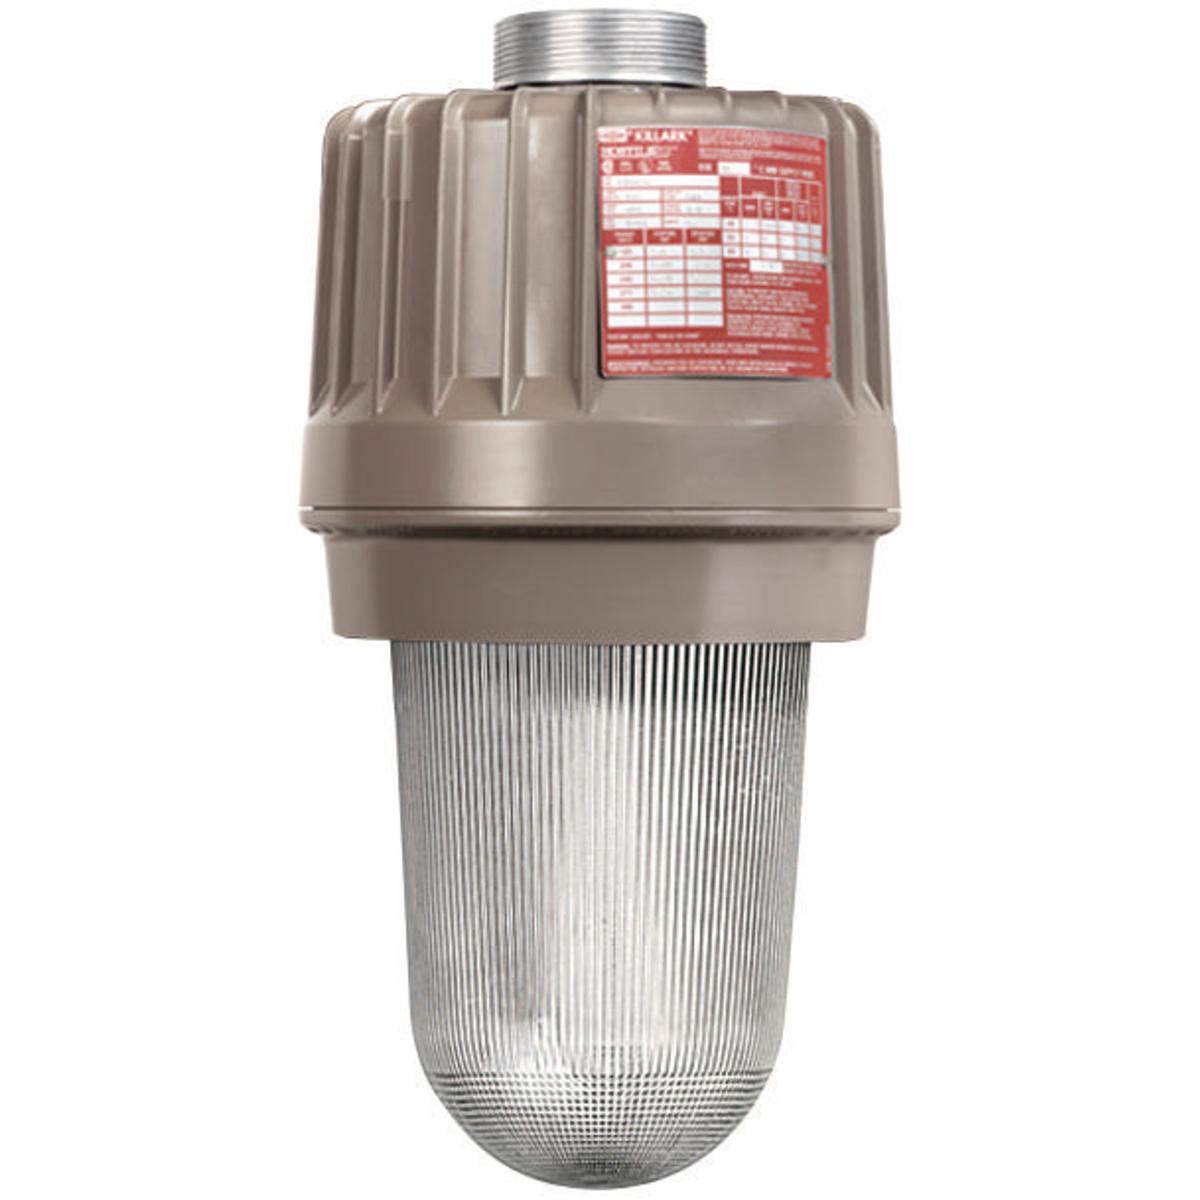 Hubbell EZS250-Q HID 250W High Pressure Sodium Quadri-Volt with Auxiliary Quartz Standby  ; Three light sources – High Pressure Sodium (50-400W), Metal Halide (70-400W) and Pulse Start Metal Halide (175-400W) ; Mounting choice –Pendant, ceiling, 25˚ stanchion or 90˚ wall 